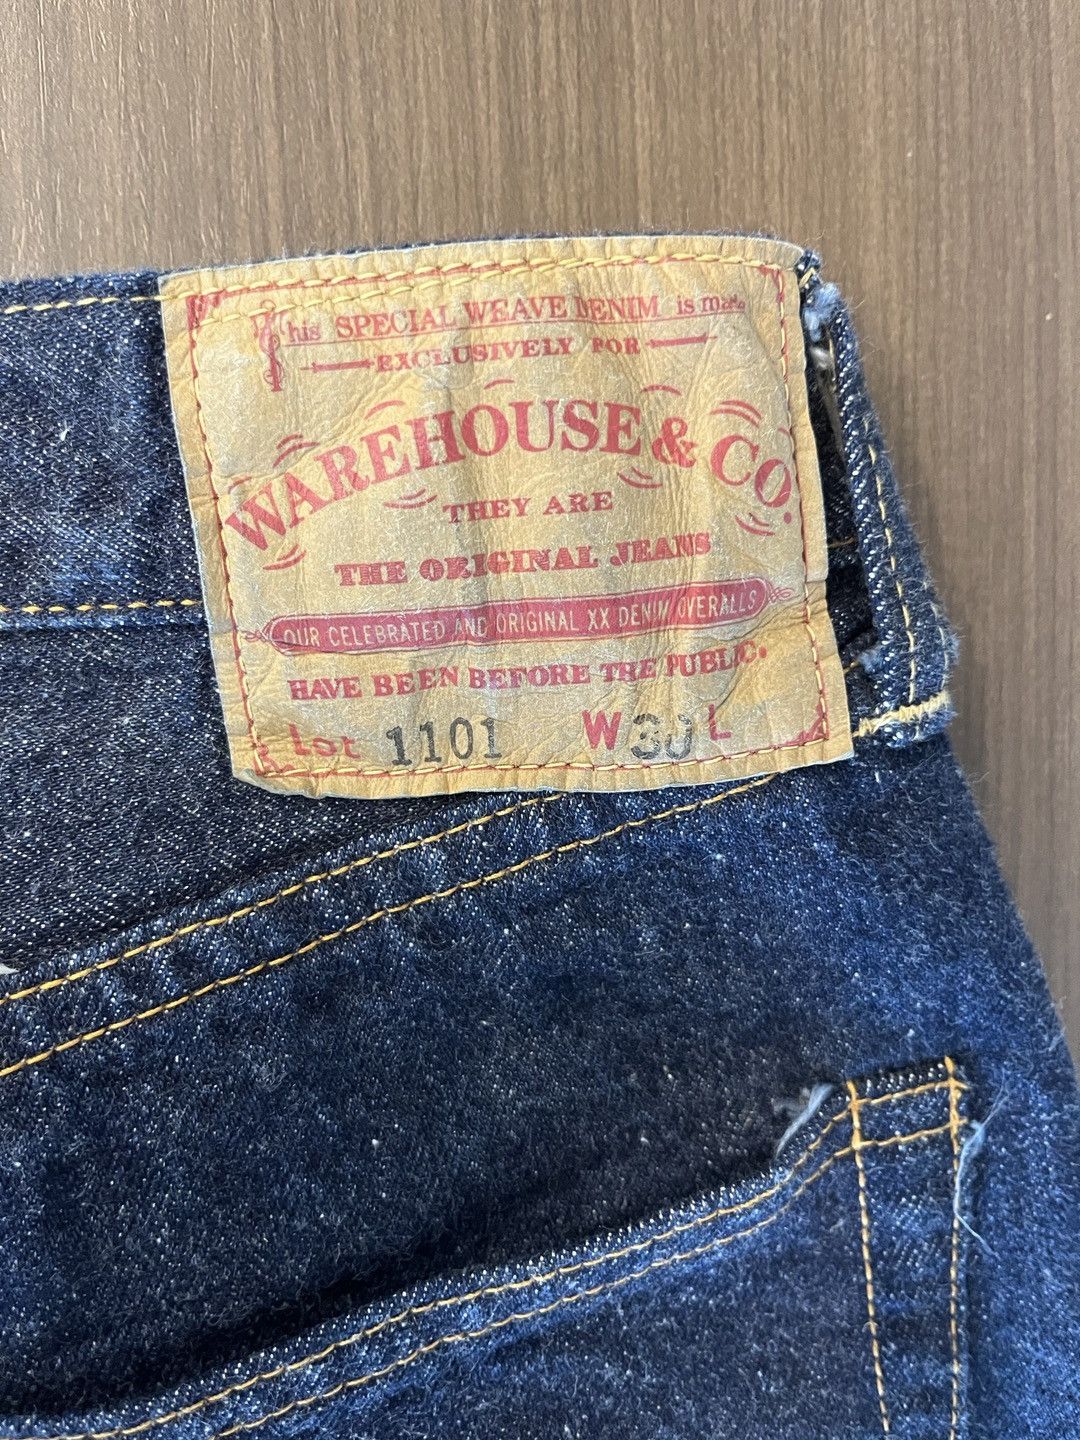 Warehouse Warehouse & Co. Lot. 1101 2nd Hand One wash (size = 30